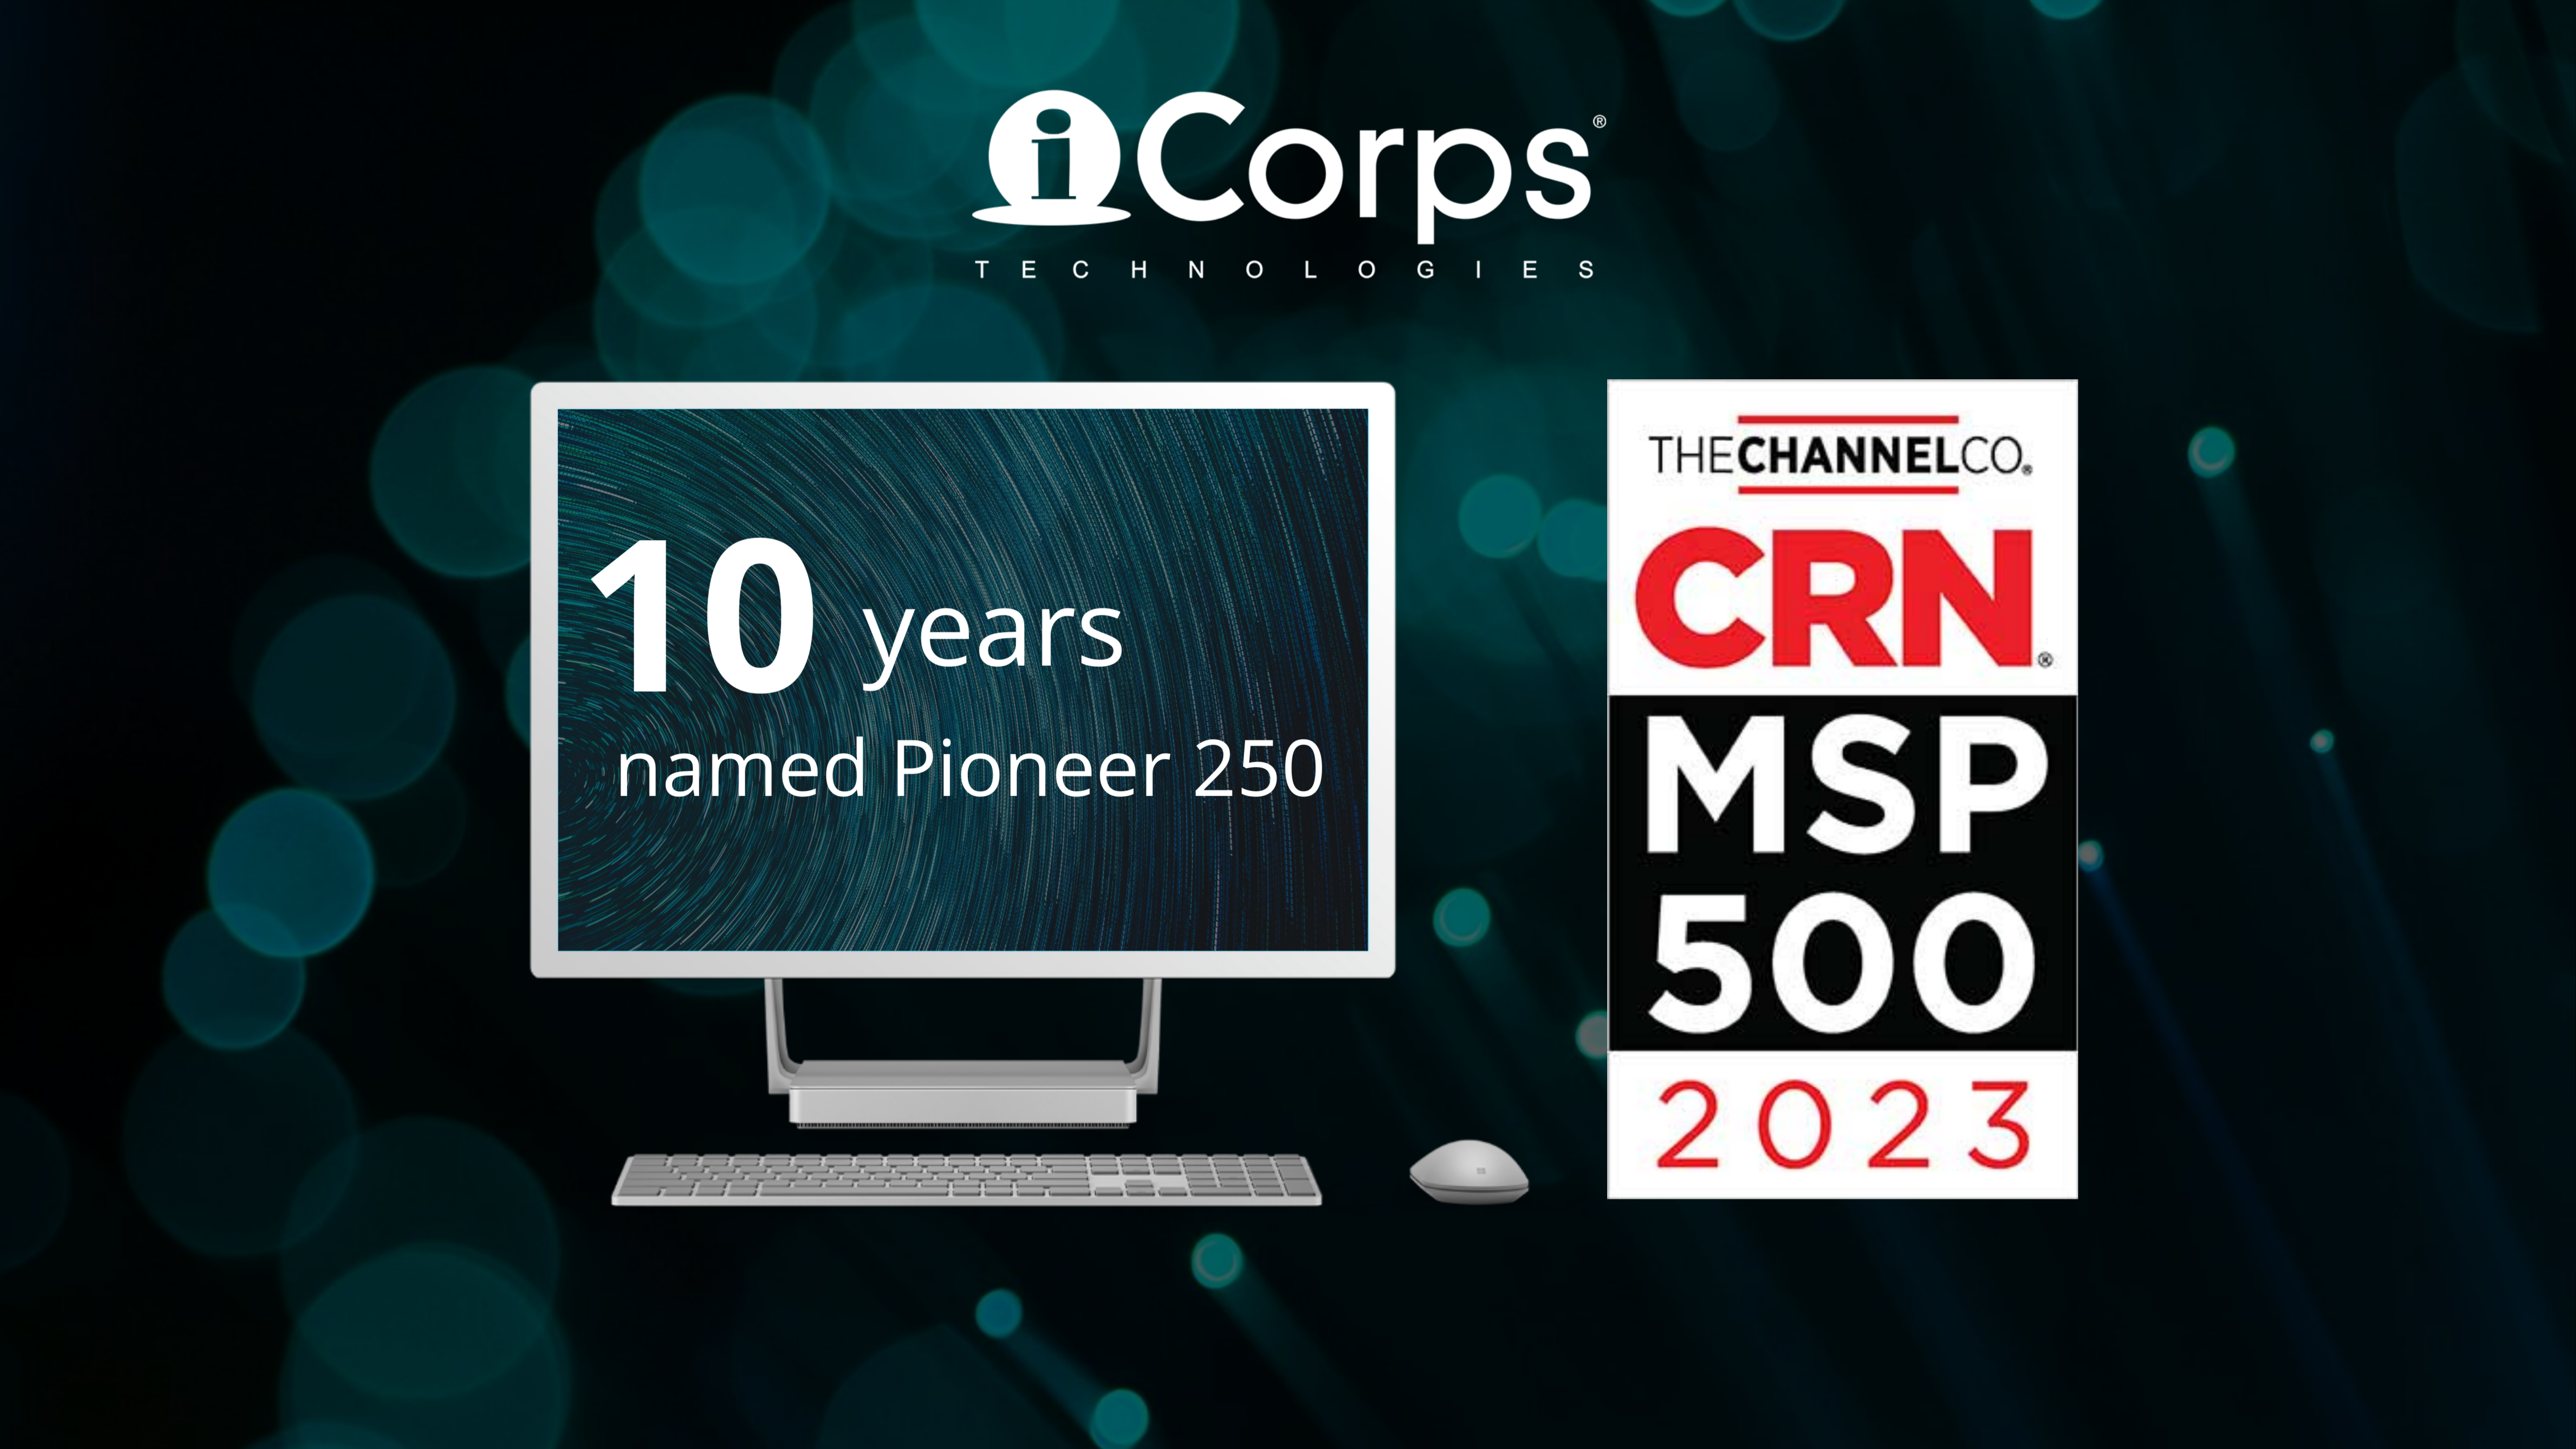 iCorps Technologies Recognized on CRN's 2023 MSP 500 List